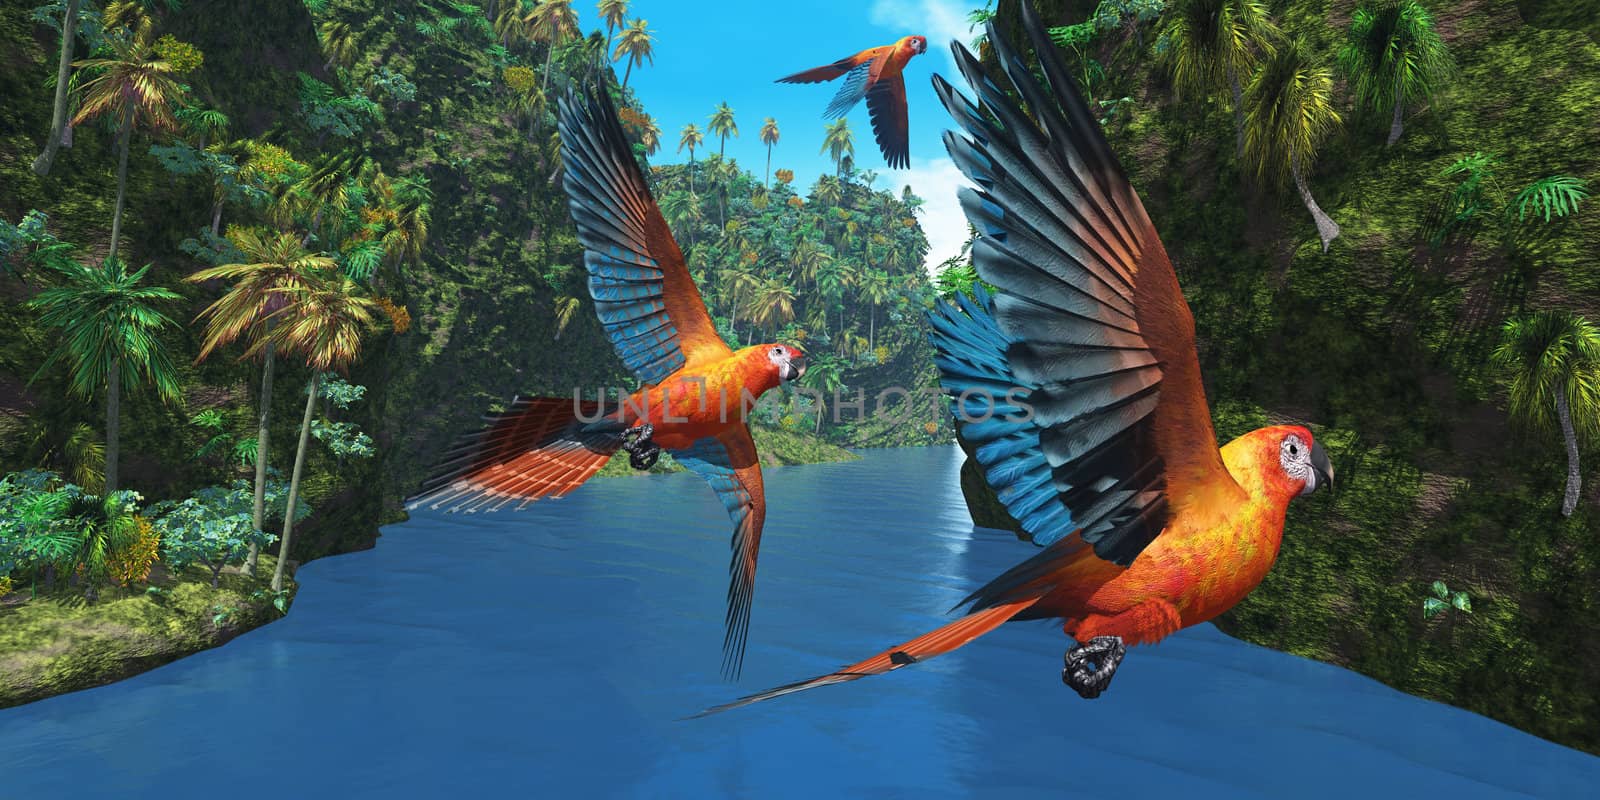 Three amazing parrots fly over a jungle river in their brightly colored plumage.